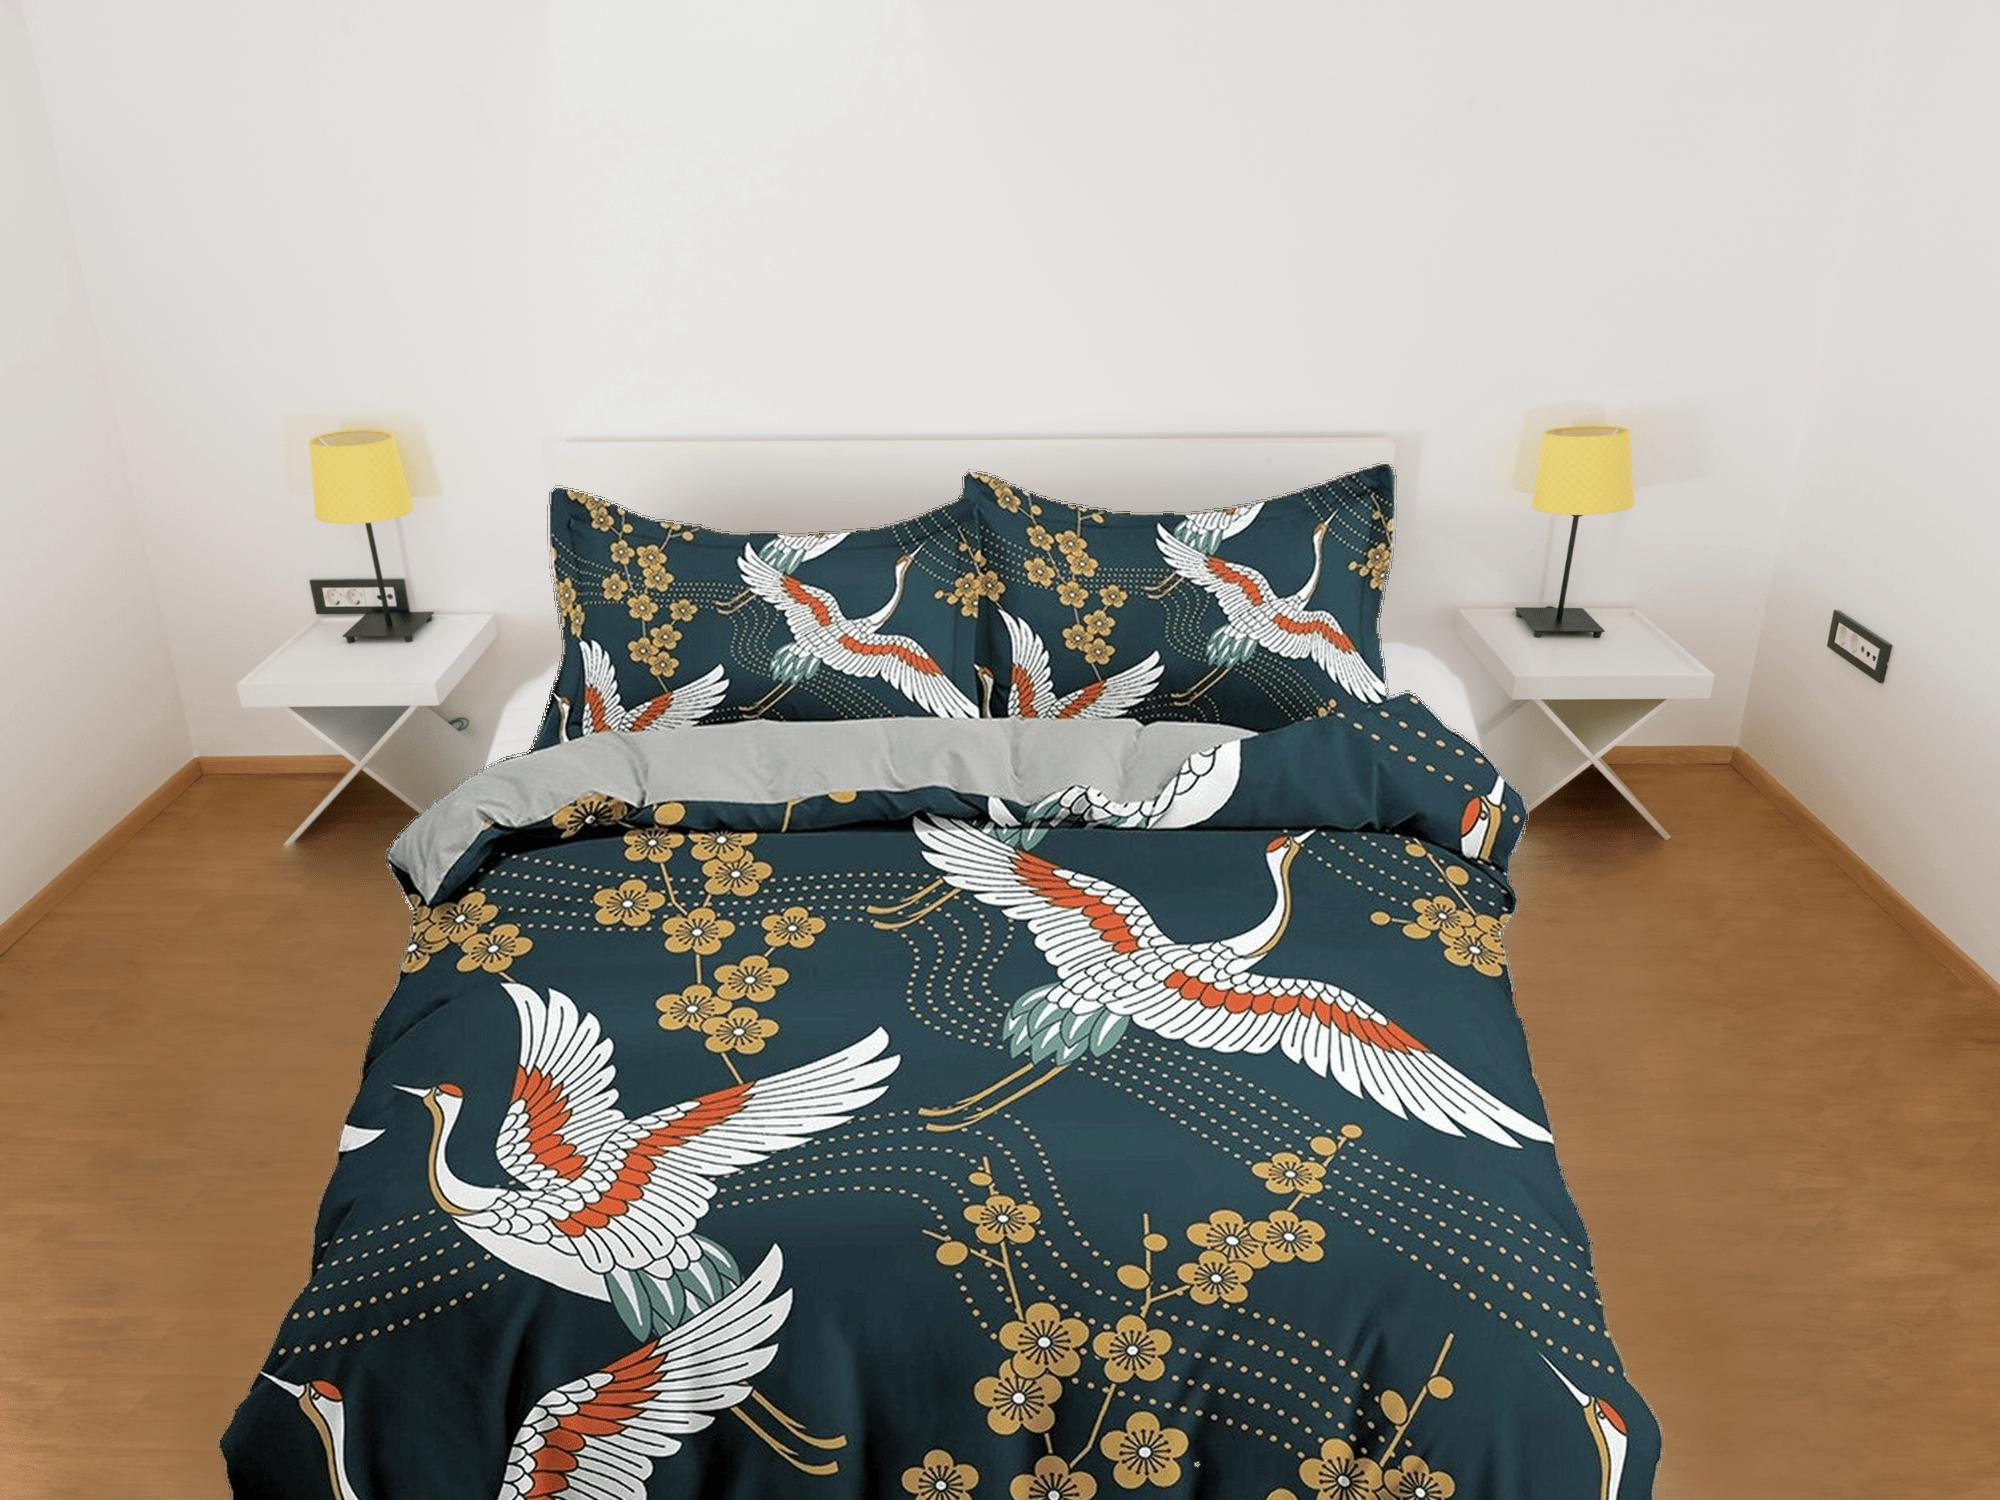 daintyduvet Dark green oriental bedding set cover, crane bird and cherry blossom floral prints on Japanese style duvet cover, king, queen, full, twin